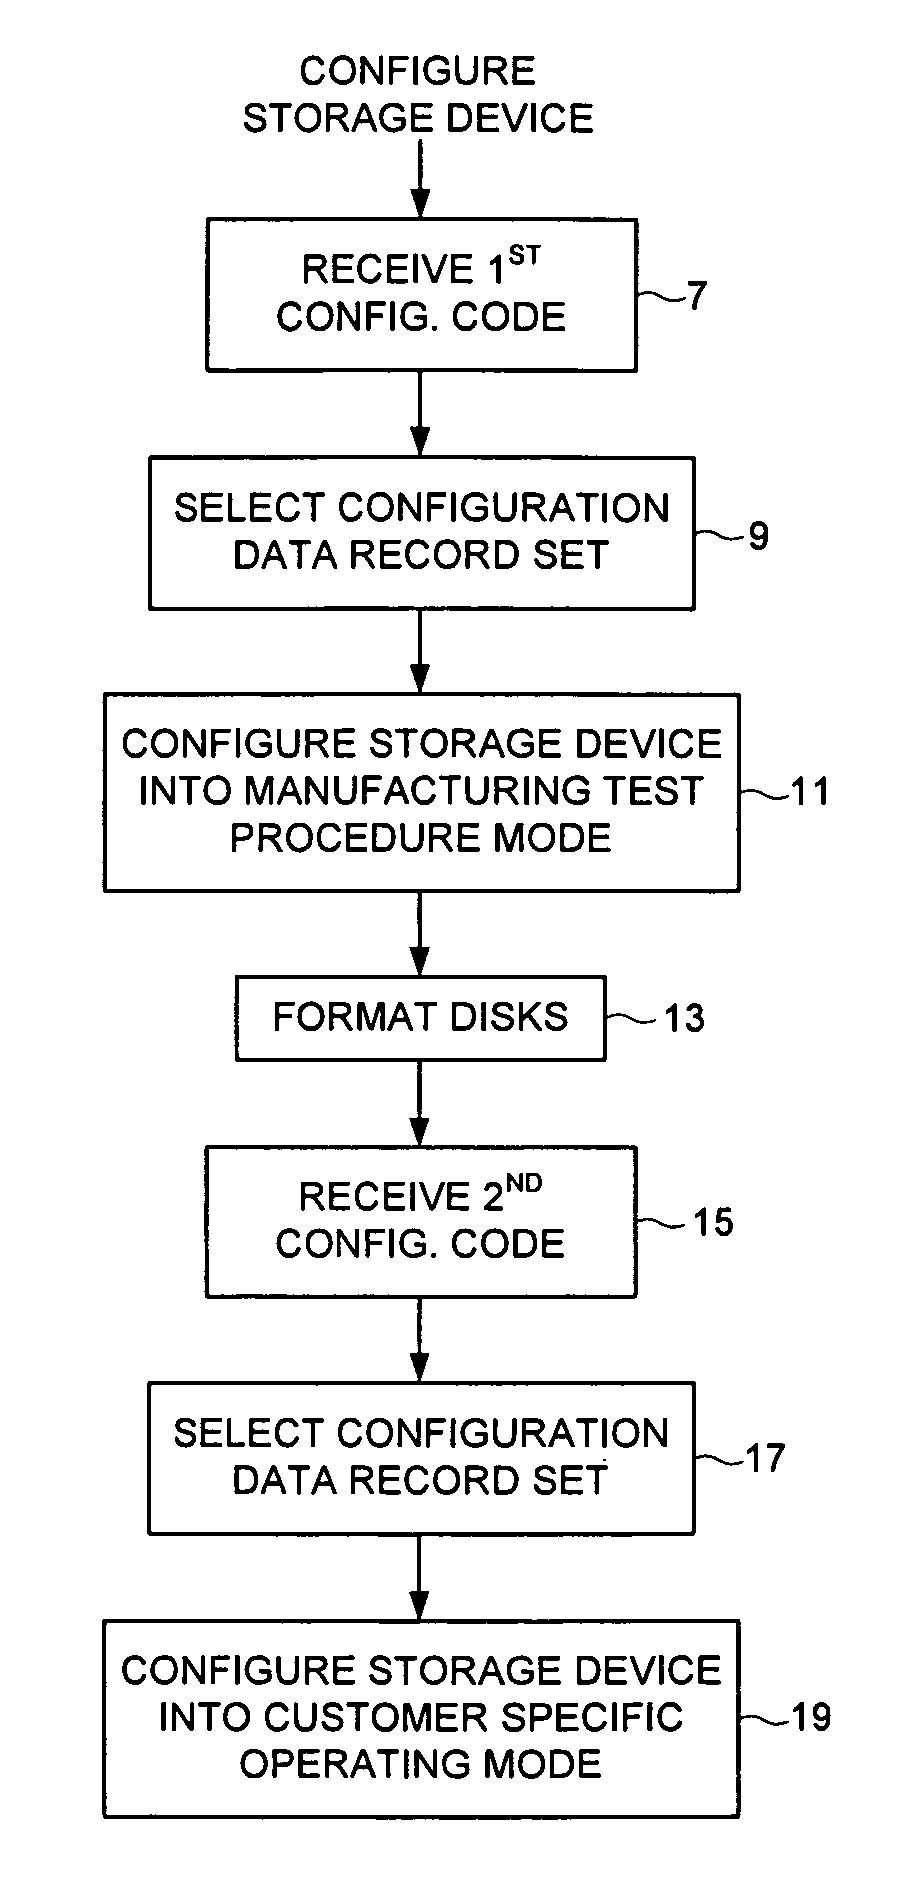 Configuring a data storage device with a configuration data record set in response to a configuration code